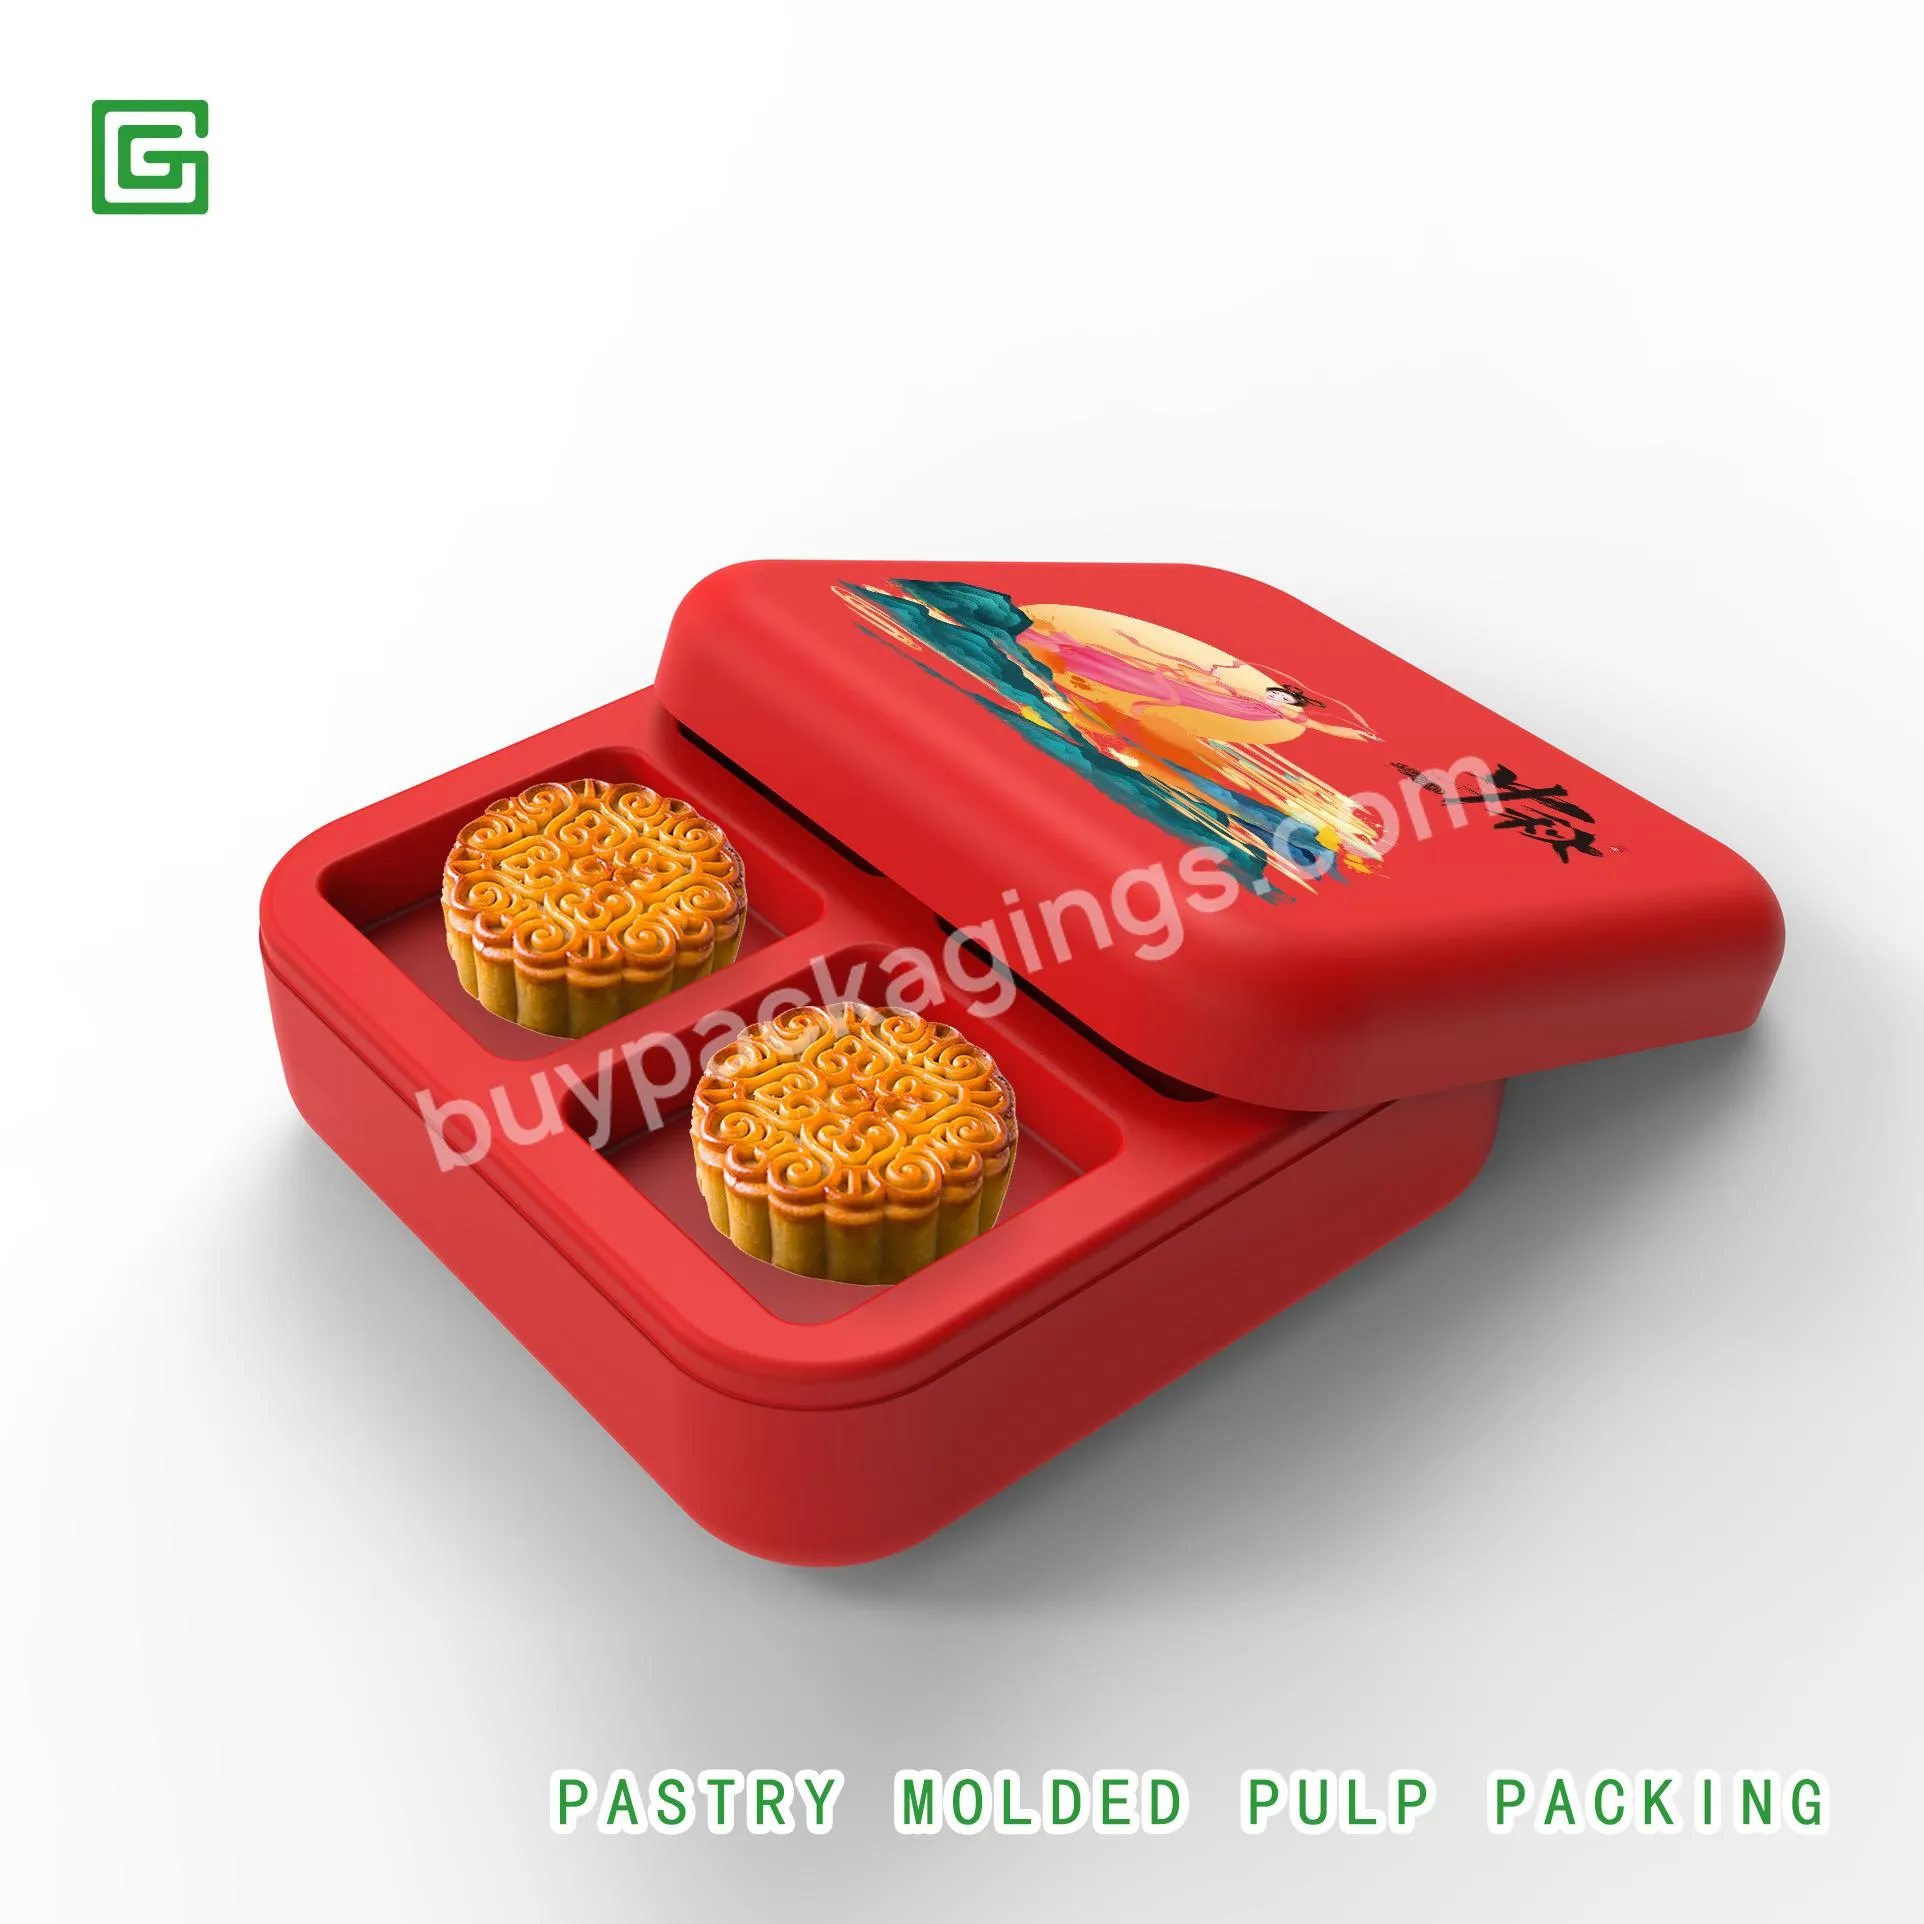 100% Degradable Full Color Recycled Popular Candy Paper Pulp Box Packaging On Sale - Buy Gift Box Set,Printing Gift Box,Paper Box Gift Box Packaging Box.